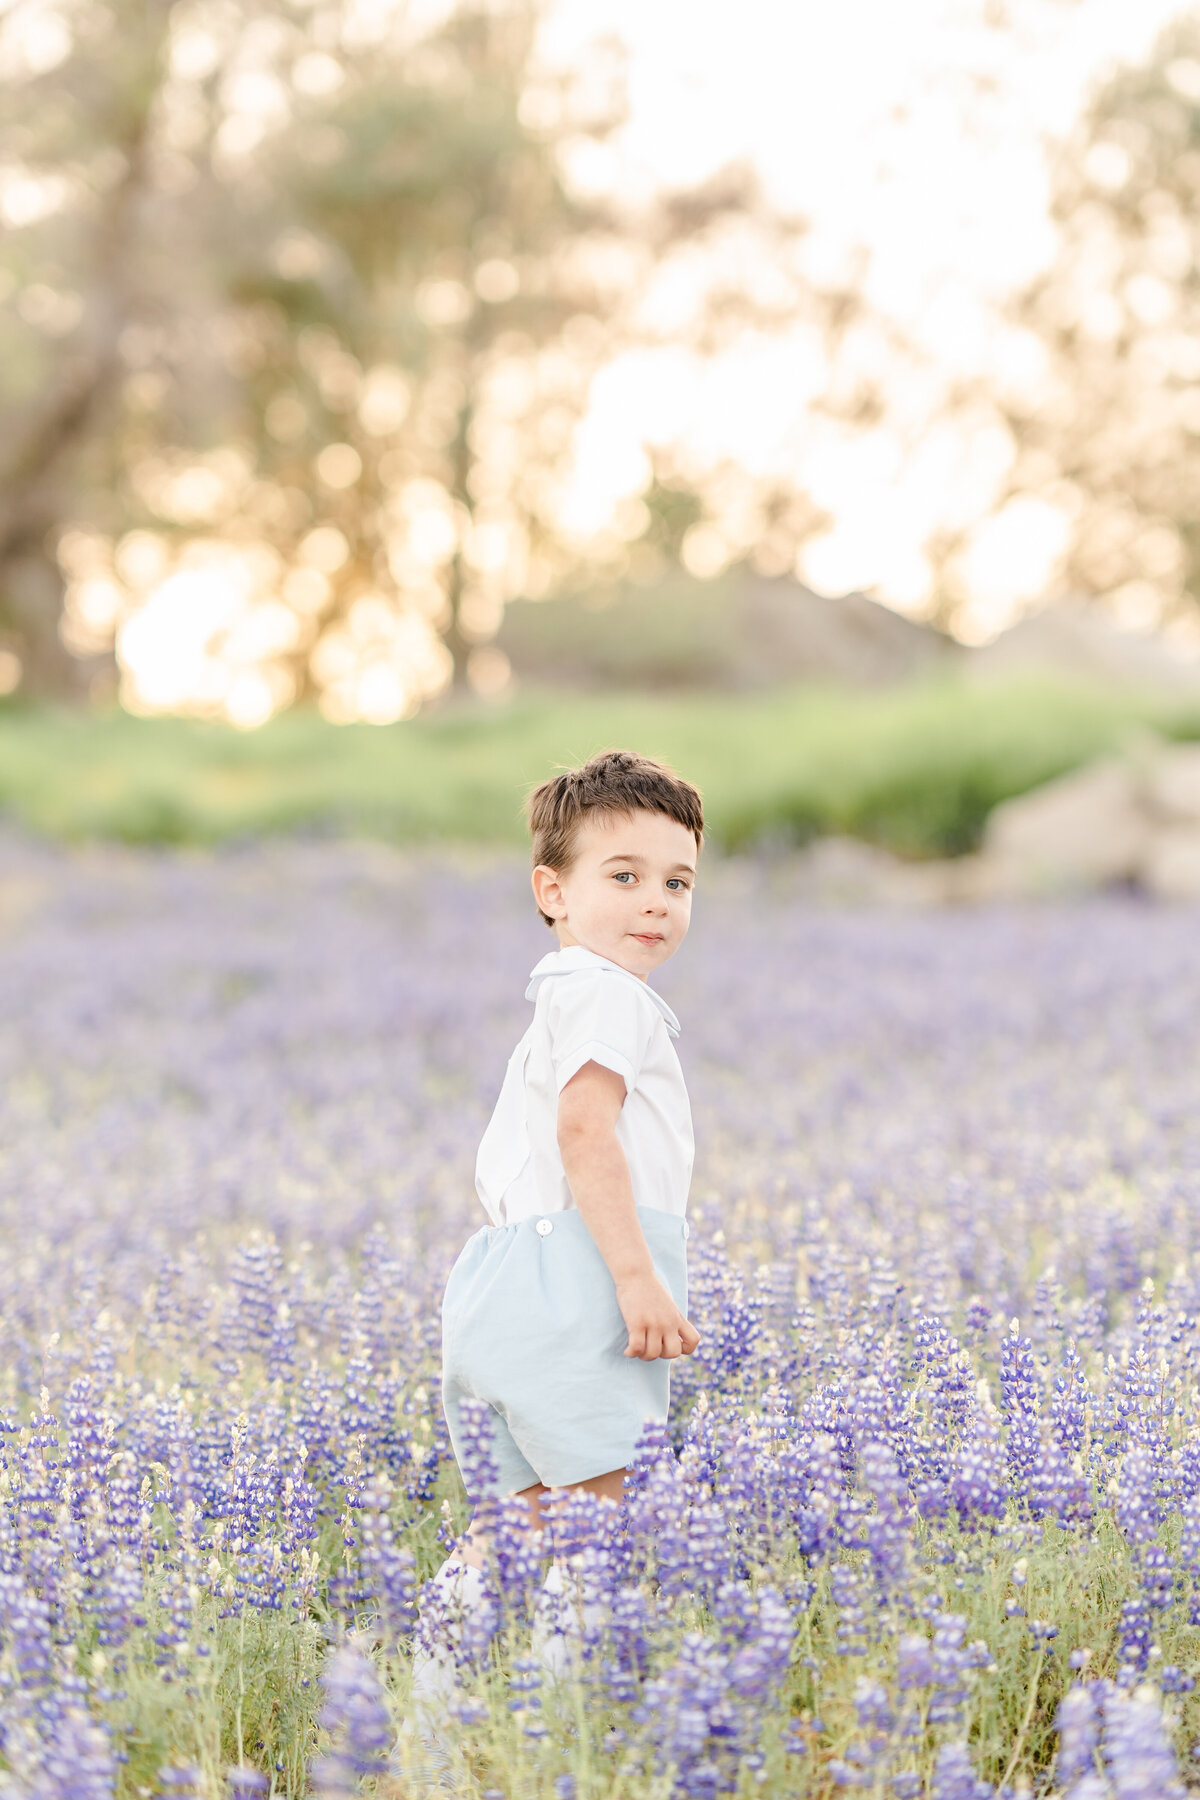 A young boy dressed in shades of white and light blue turns as he walks in a field of purple lupine flowers photographed by bay area photographer, Light Livin Photography.